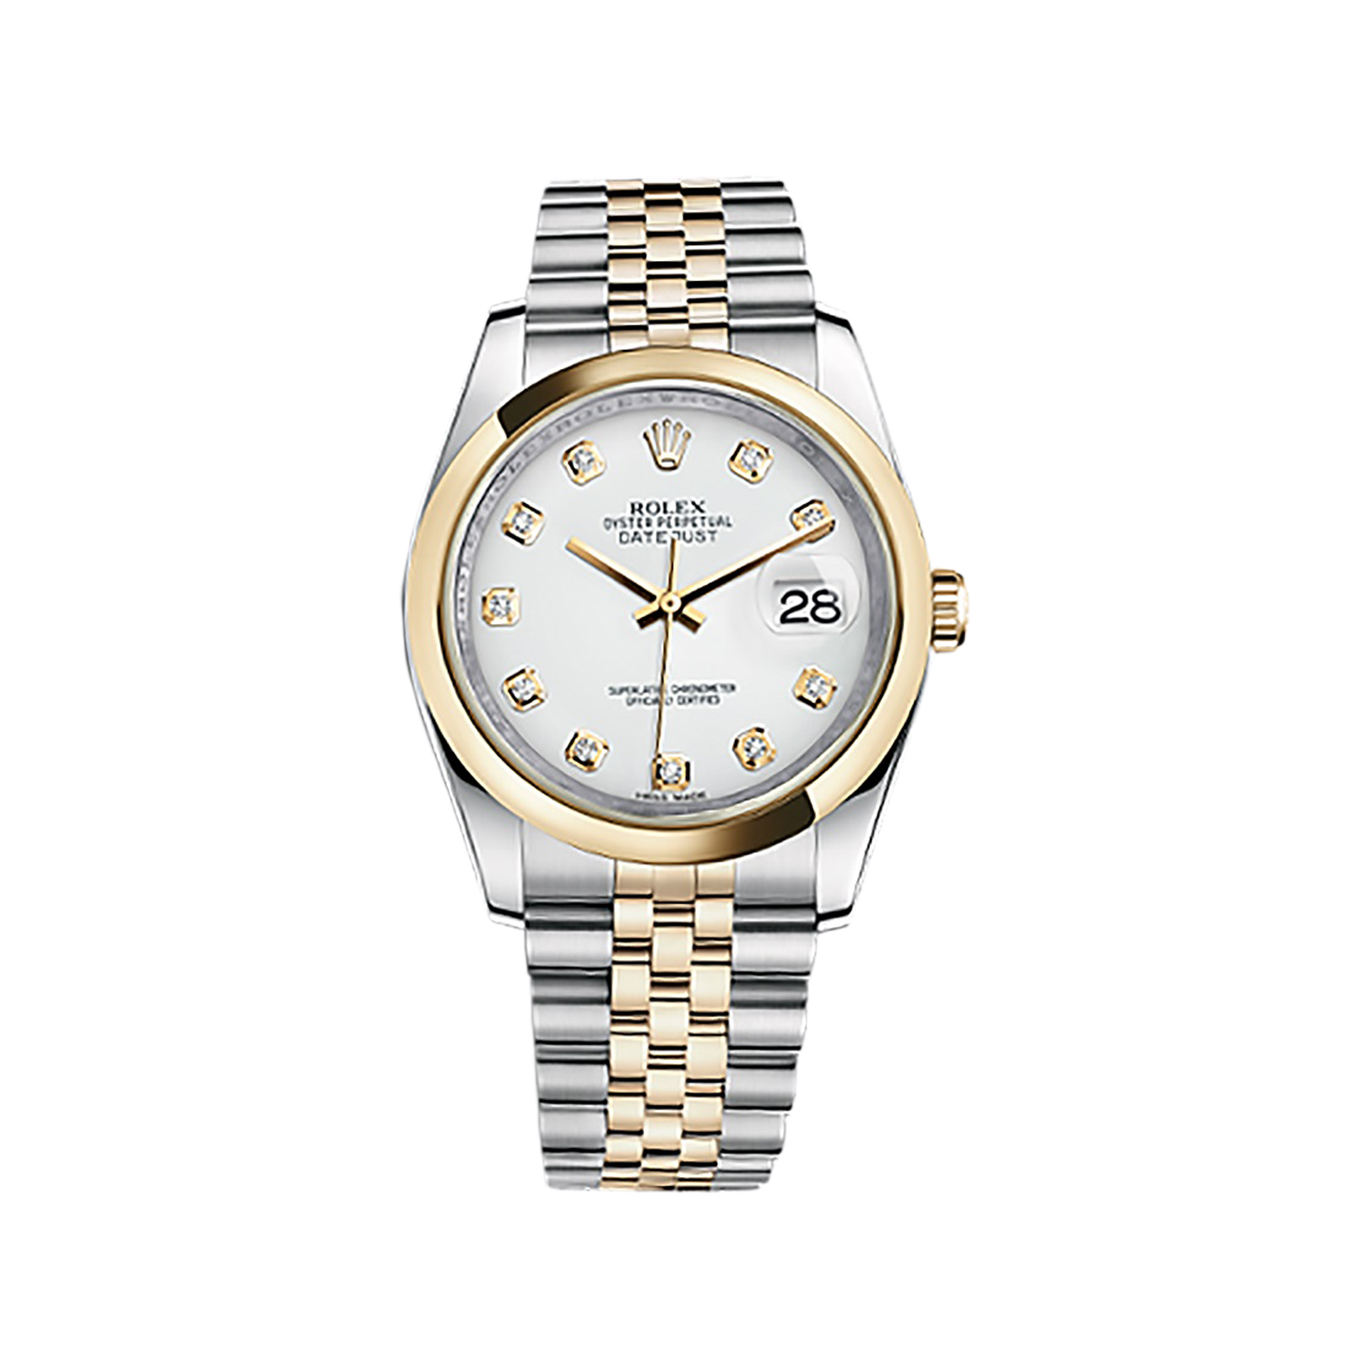 Datejust 36 116203 Gold & Stainless Steel Watch (White Set with Diamonds)